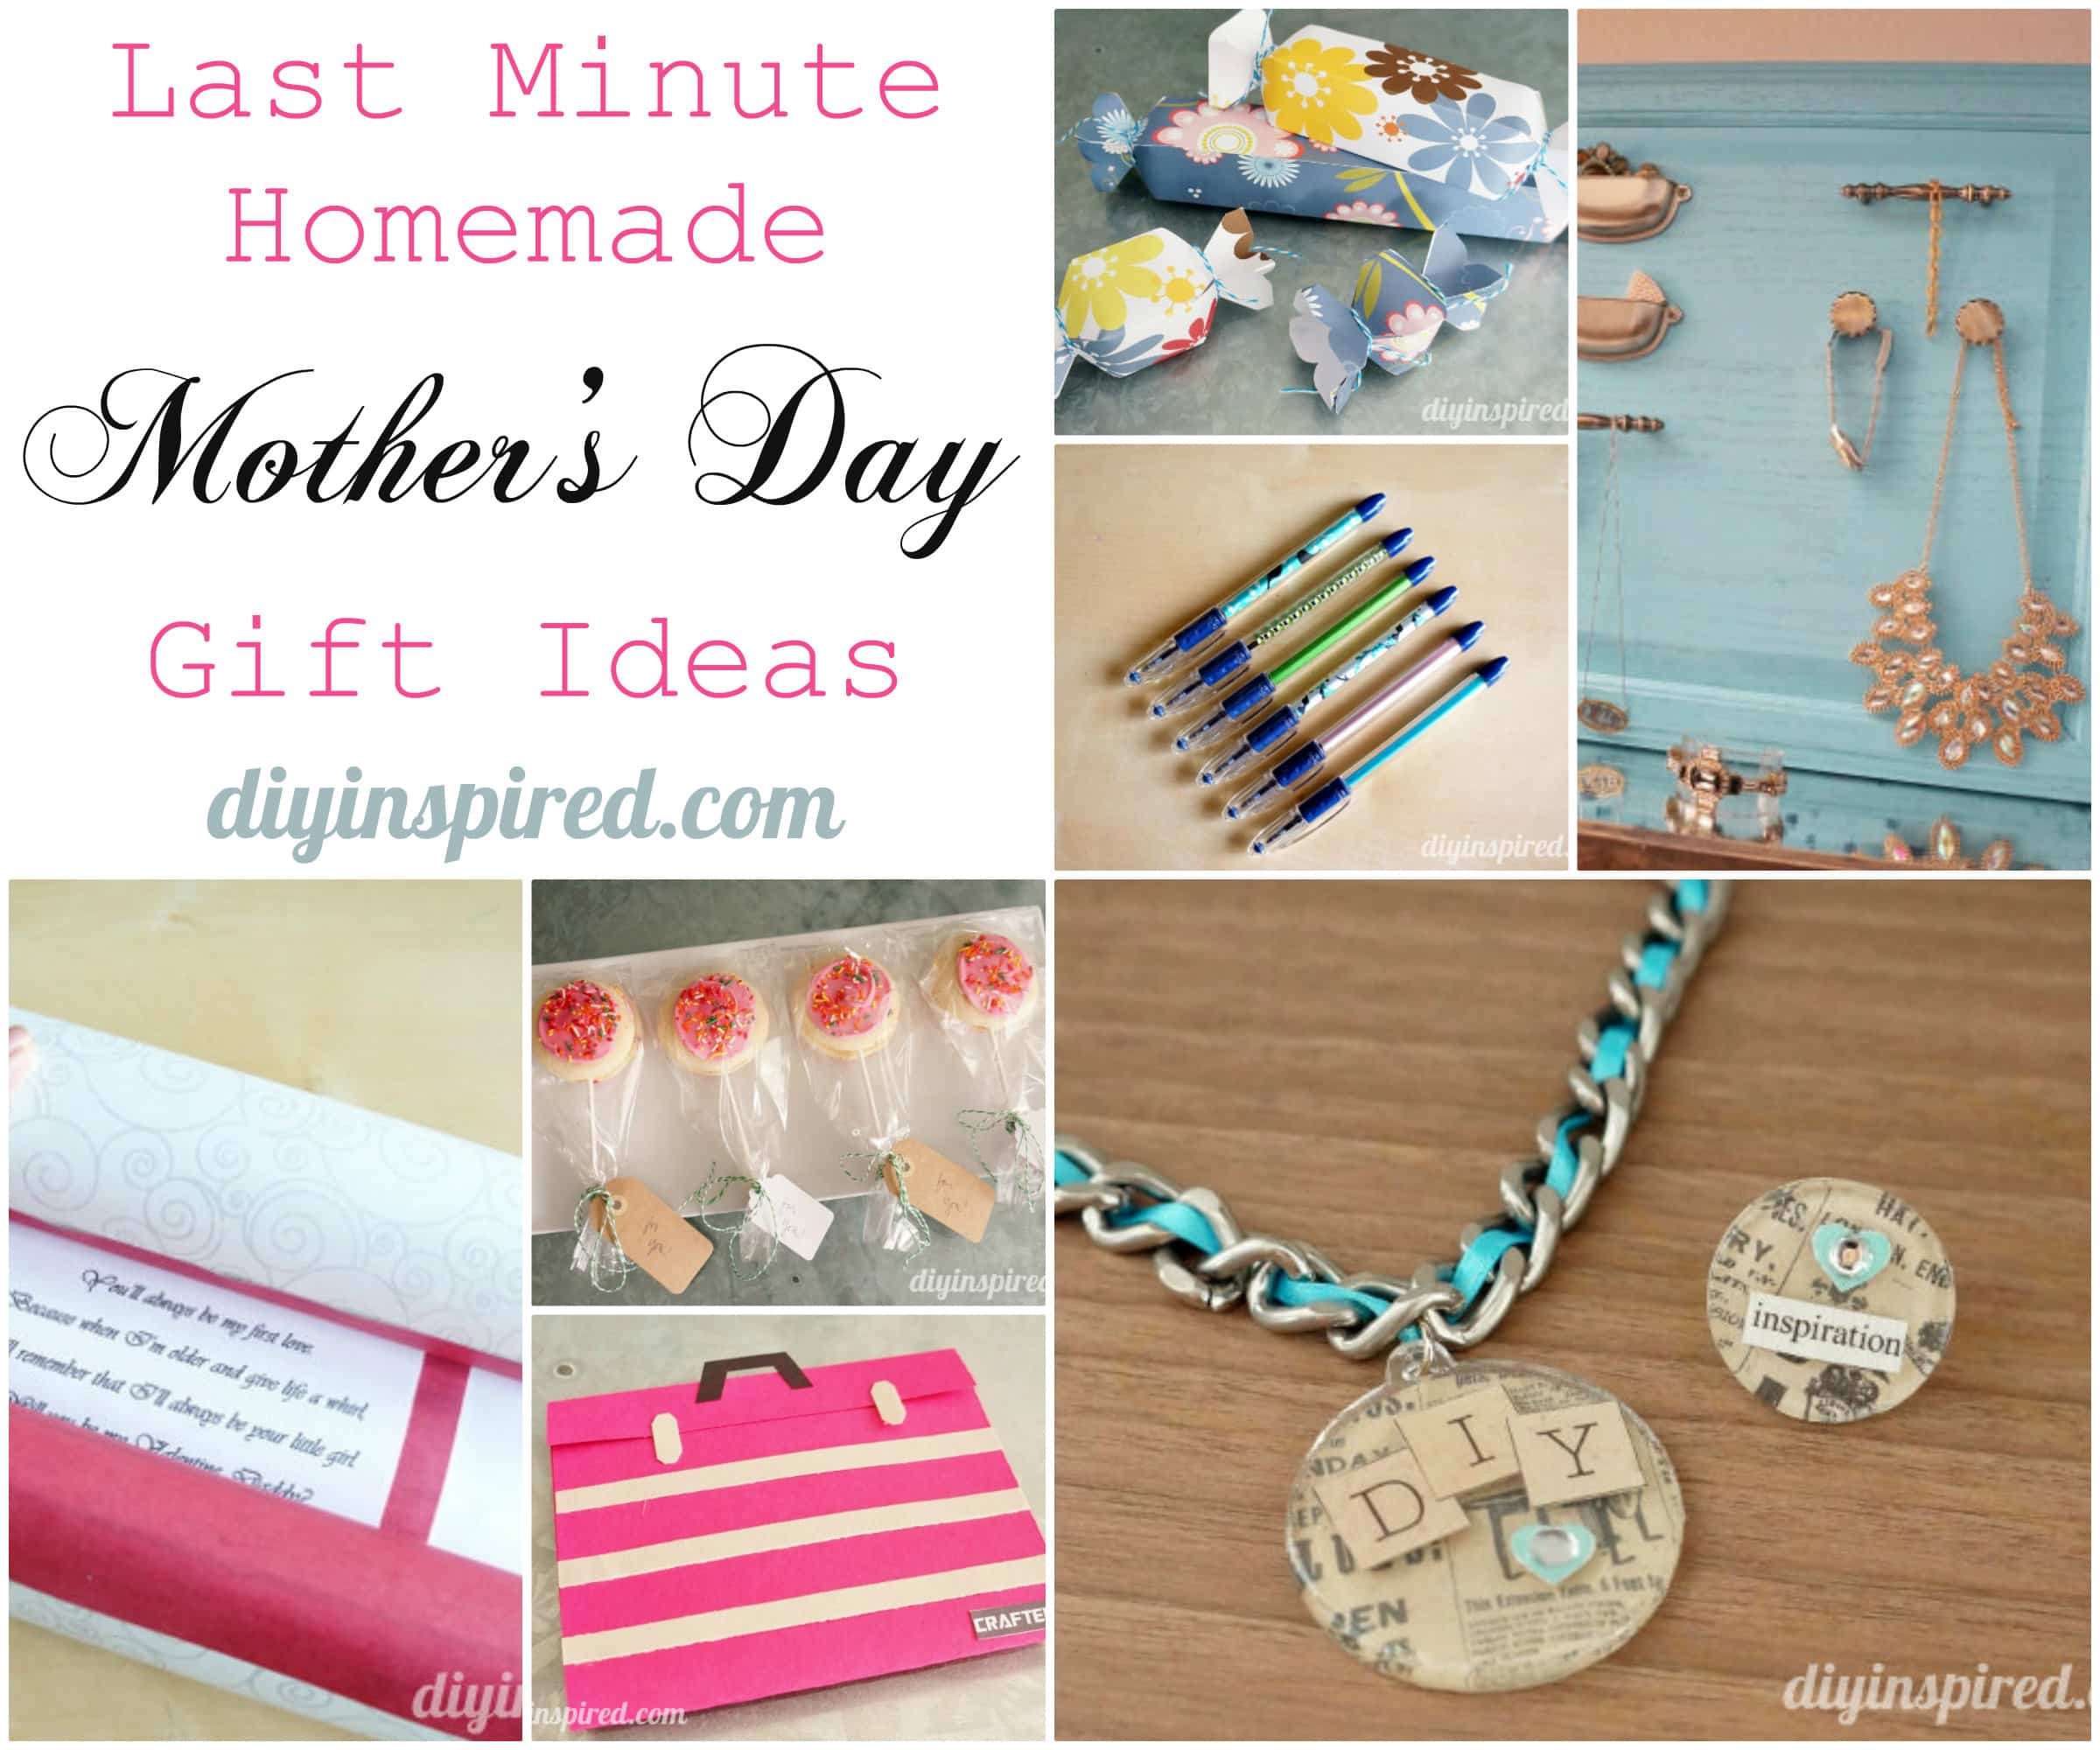 Last Minute Mother Day Gift Ideas
 Last Minute Homemade Mother’s Day Gift Ideas DIY Inspired